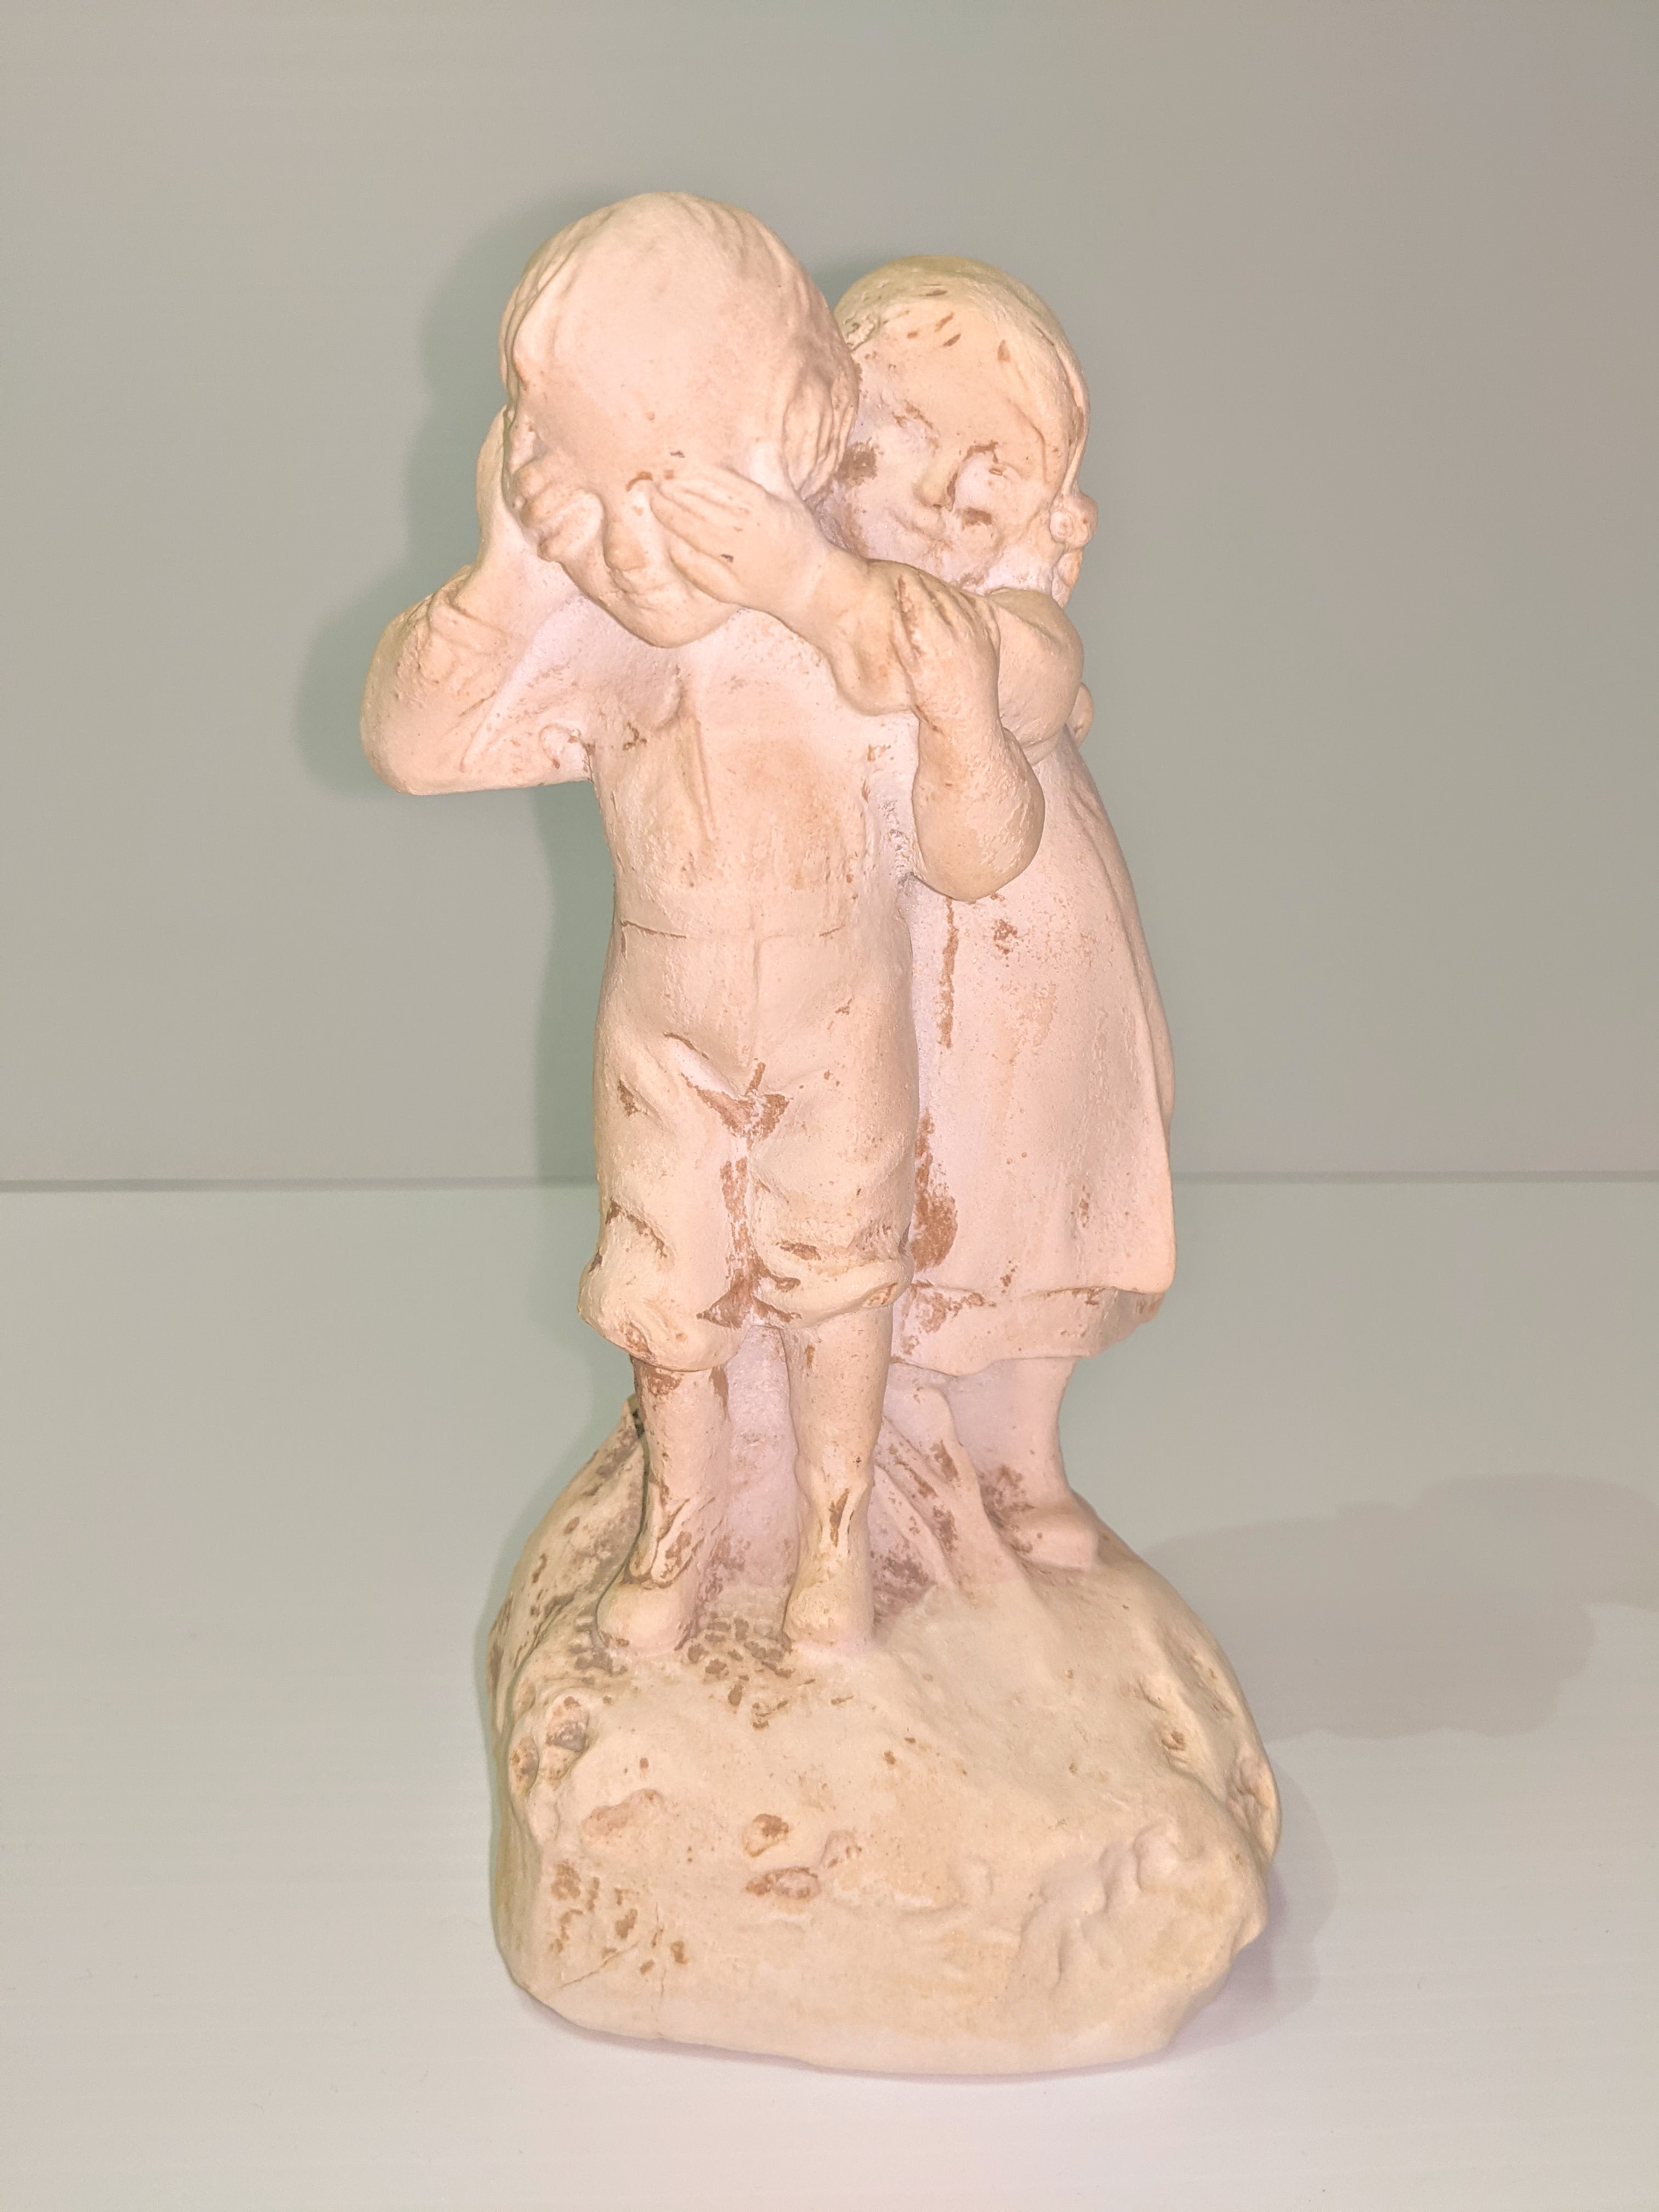 This adorable statue of 2 kids playing was donated to the FVHC by Eunice Hitchcock - who was a teacher in Fort Vermilion for many years. The statues main unique feature is its medium - it's made of salt! We would love to know how that process works, please contact us if you have more information on it - or have connections to Eunice!

22/2/2021
1999.03.98 / Hitchcock, Eunice
